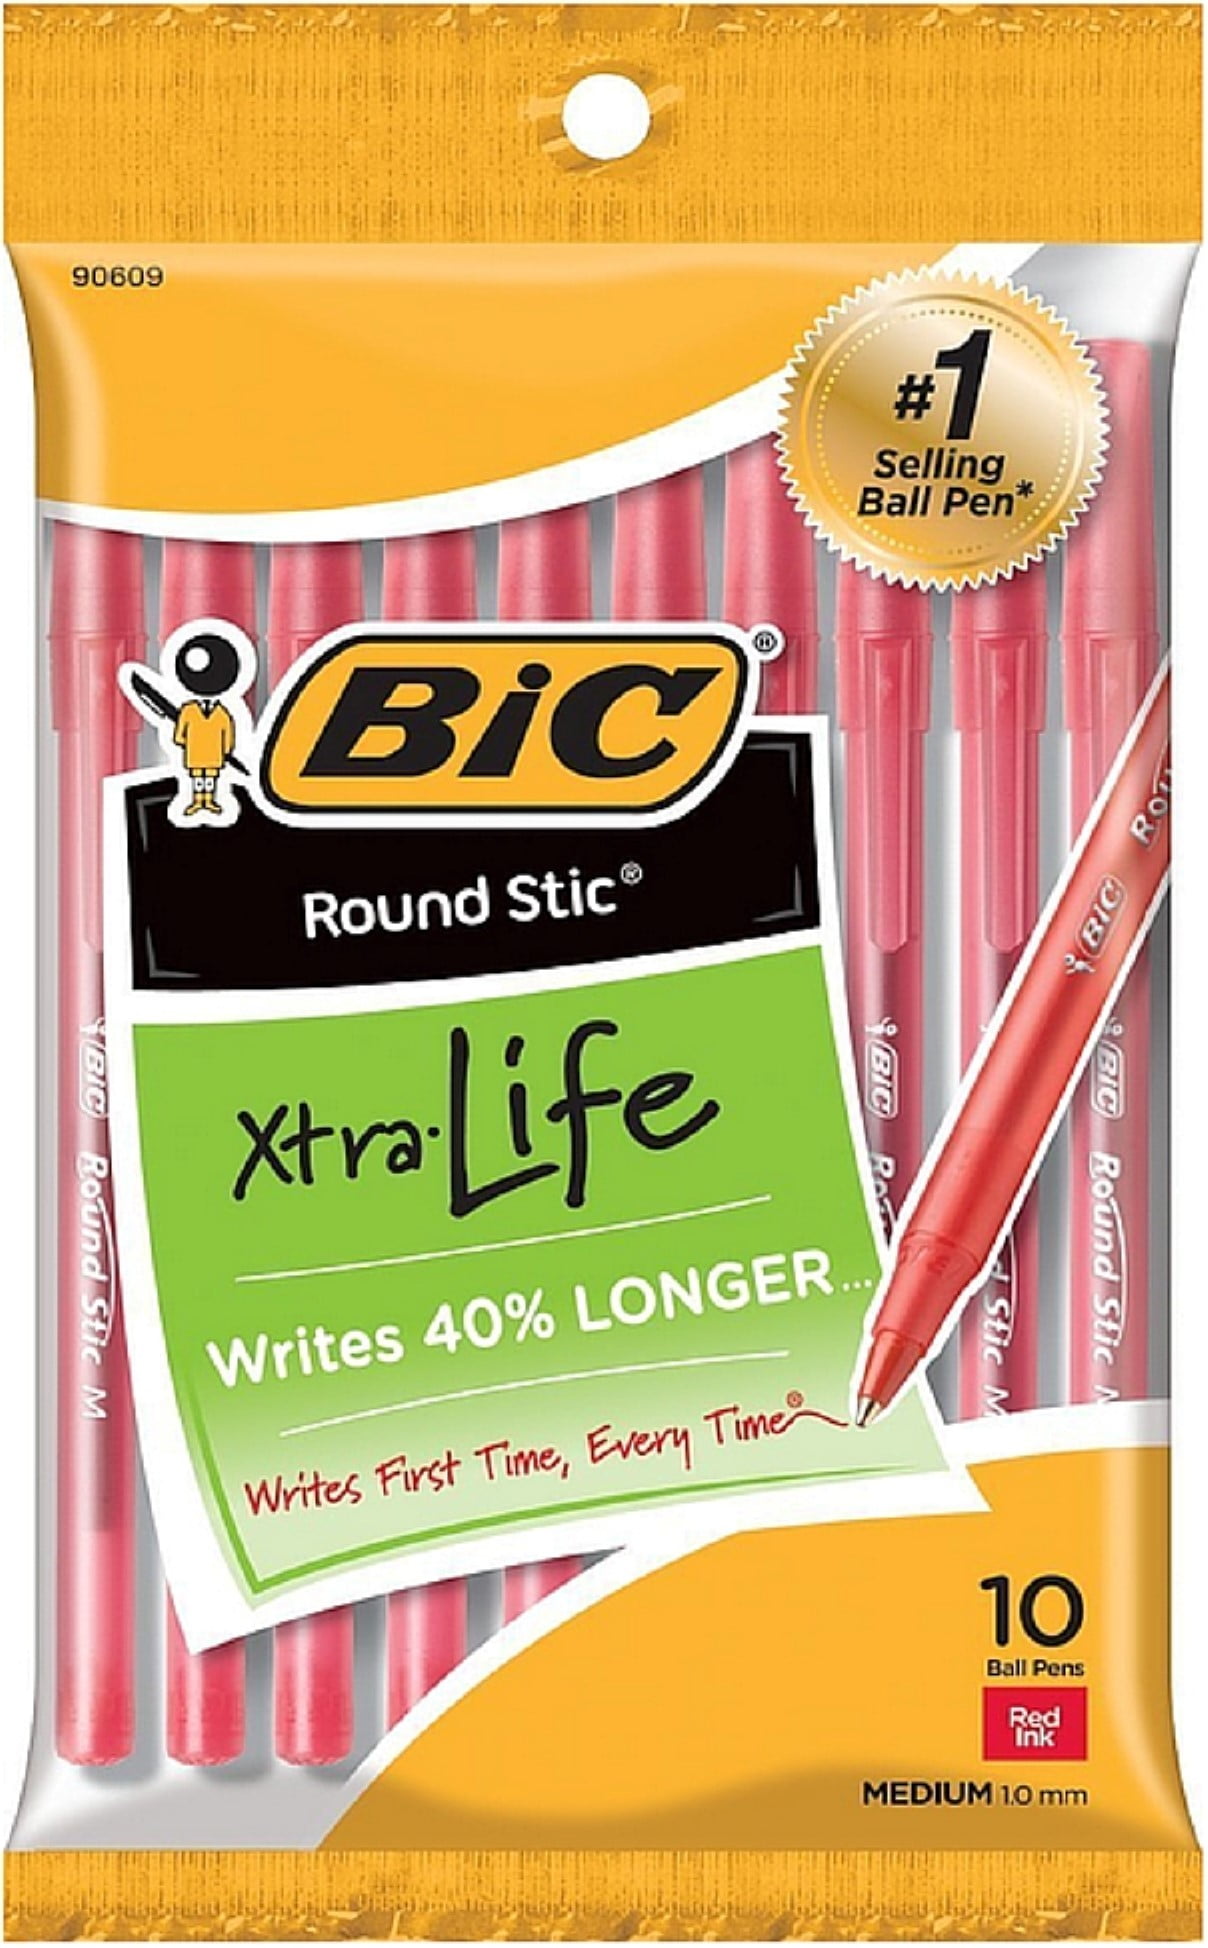 New Medium Point 1.0mm Flexible Round Barrel For Writing Comfort Black Round Stic Xtra Life Ballpoint Pen 60-Count